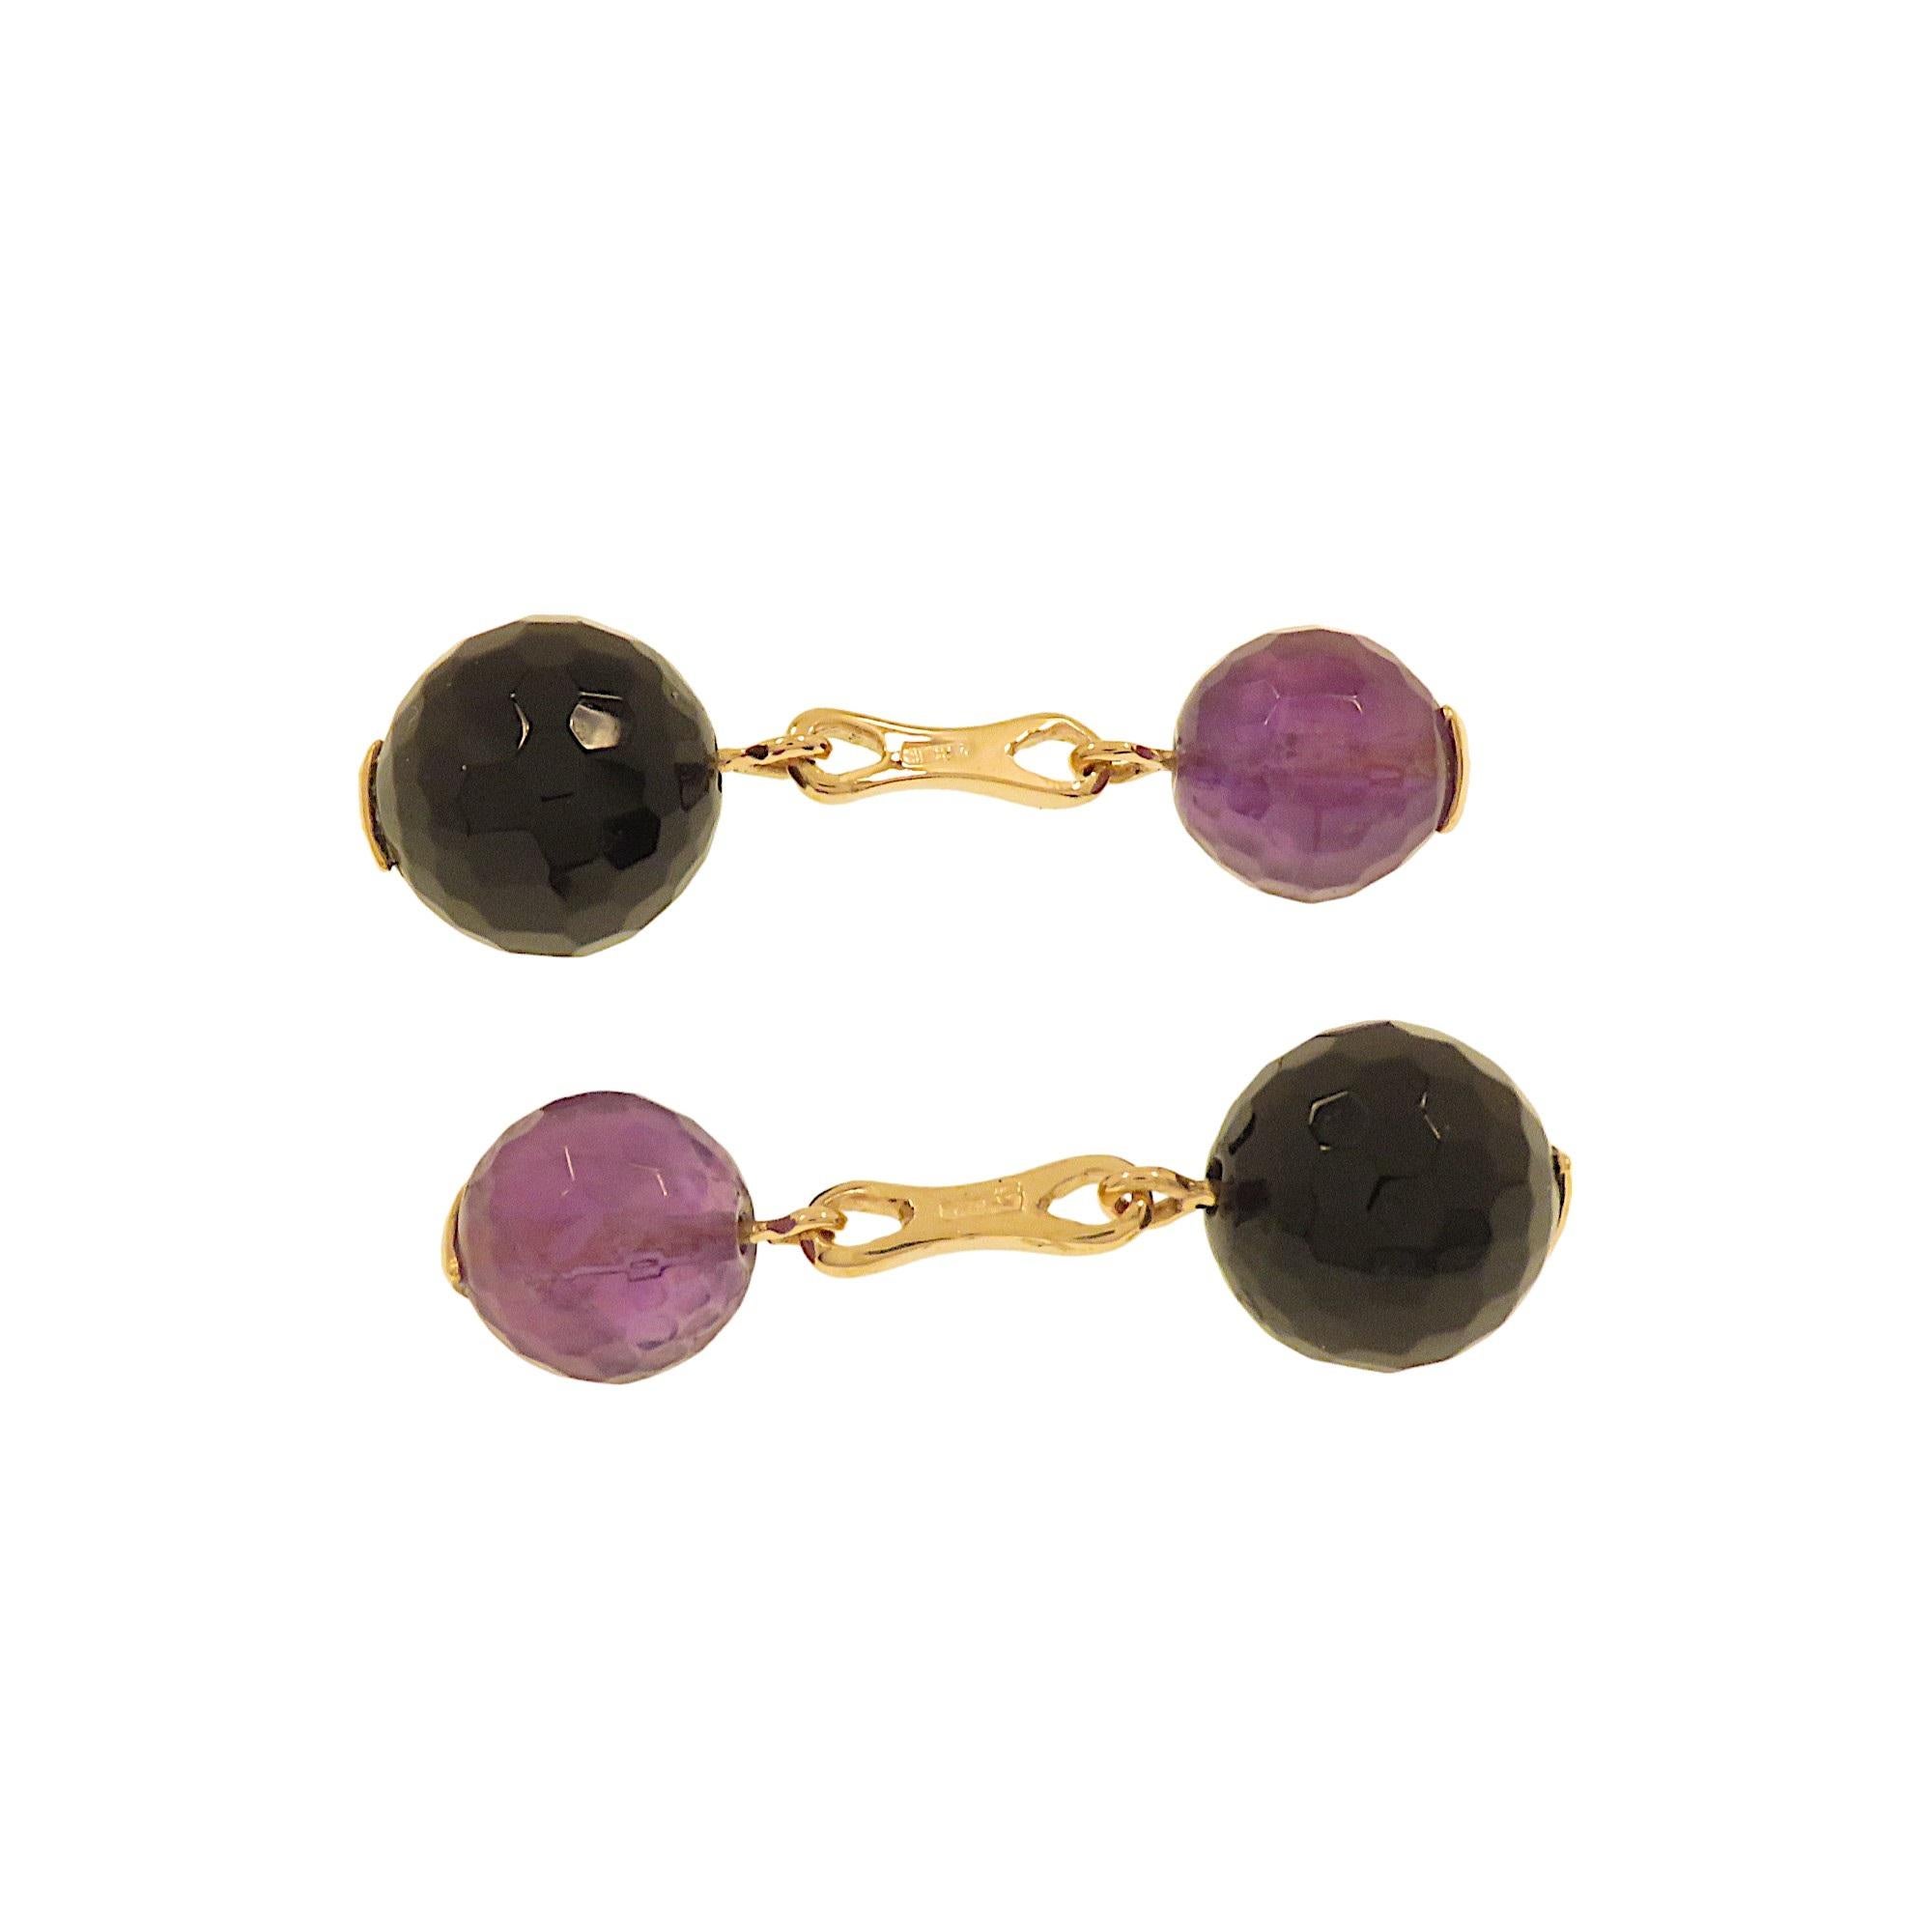 Contemporary Botta Jewelry cufflinks with onyx and amethyst in rose gold For Sale